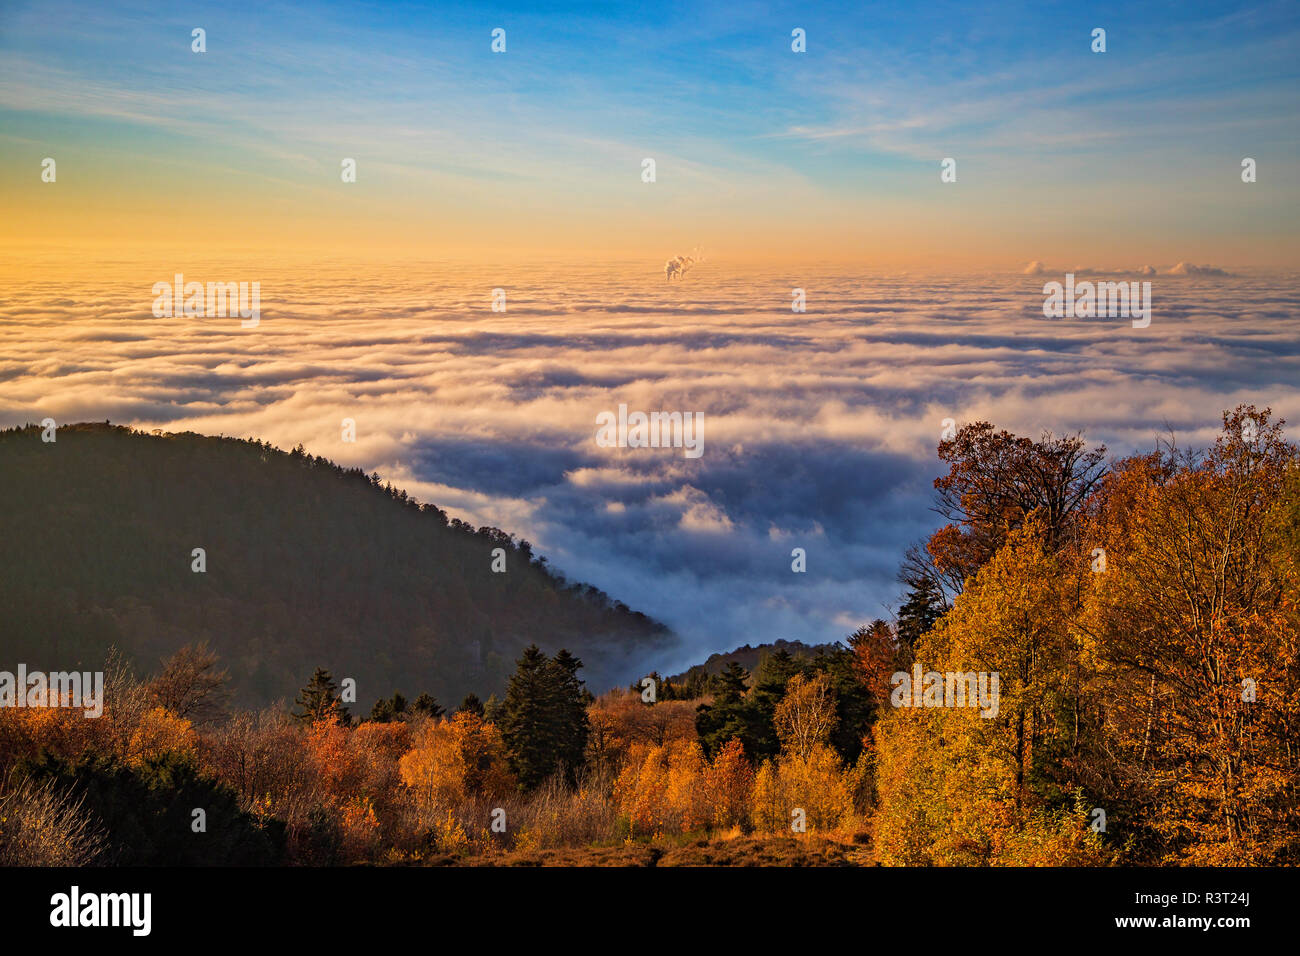 Sea of fog with low-hanging clouds in the Upper Rhine plain seen from the Königstuhl lookout point, Heidelberg, Baden-Wuerttemberg, Germany Stock Photo